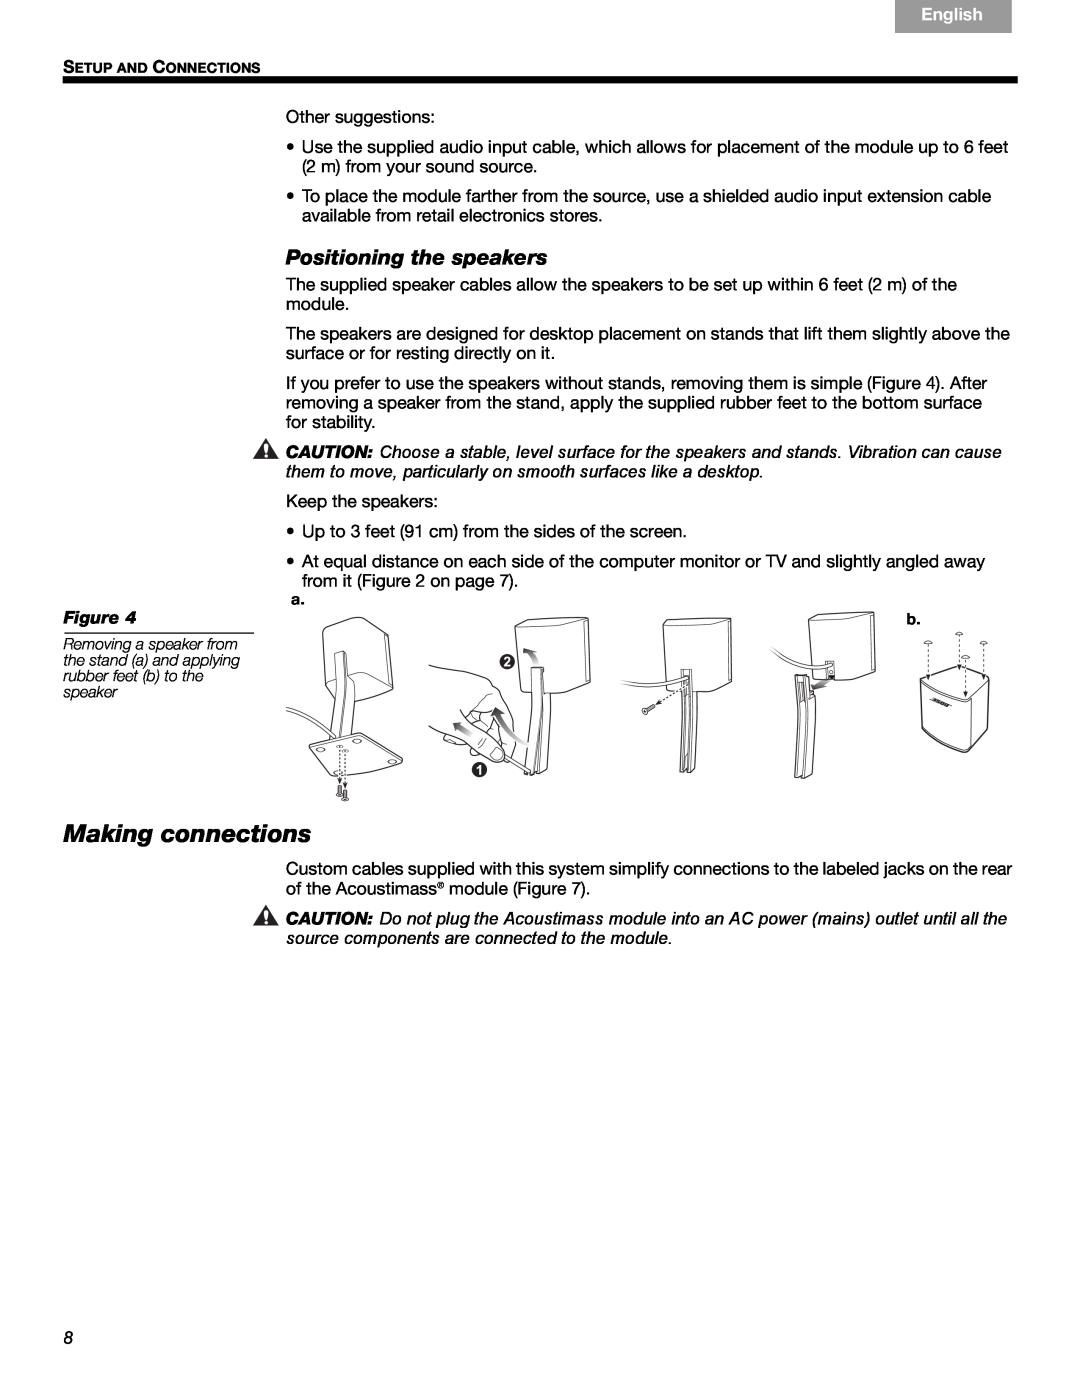 Bose 3 manual Making connections, Positioning the speakers, Français Español, English 